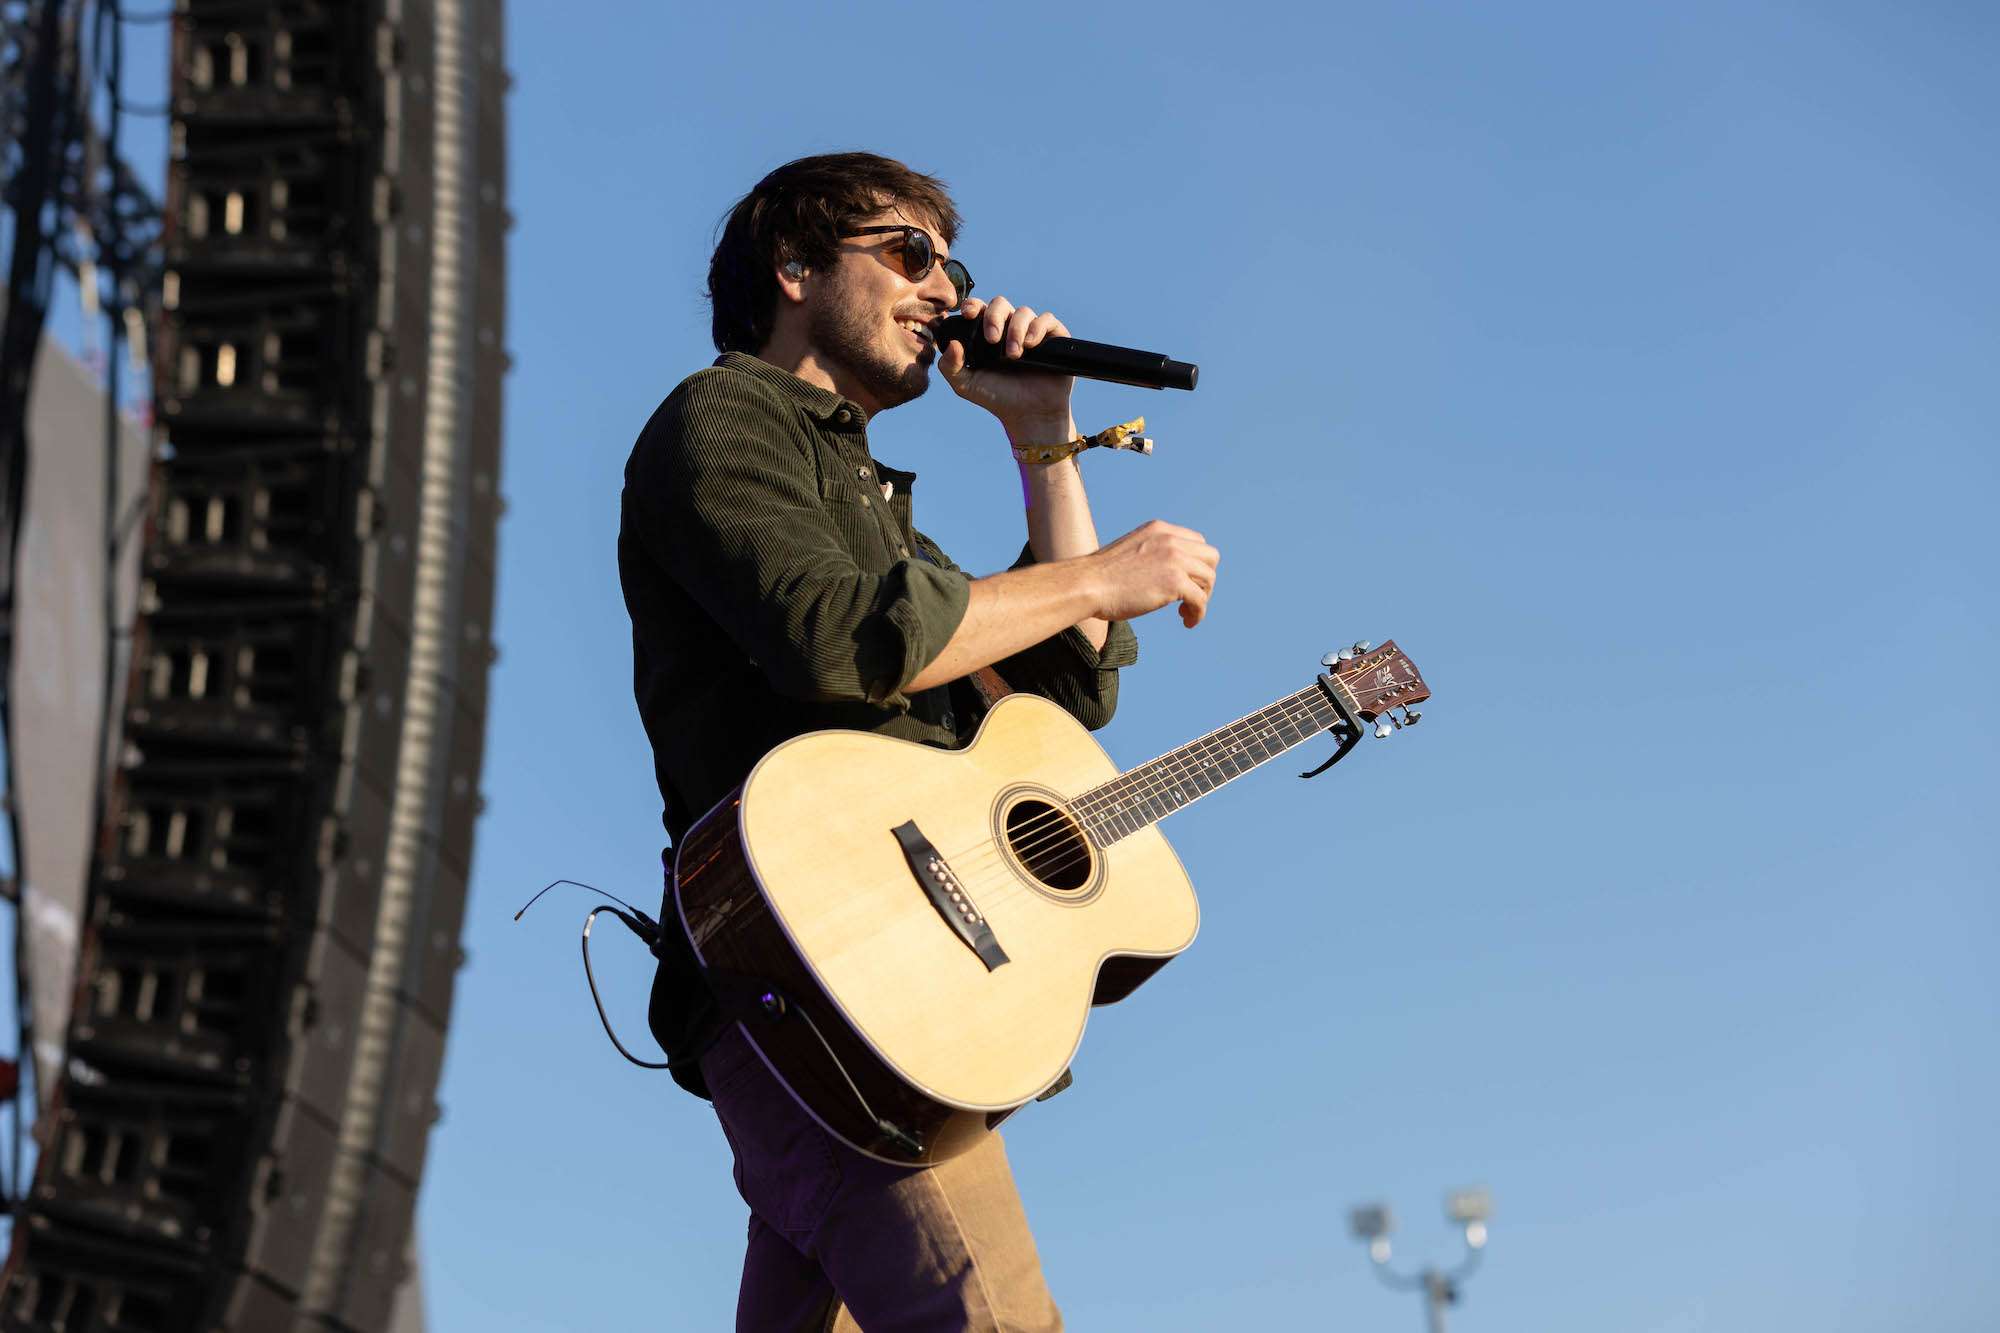 Morgan Evans - Windy City Smokeout - Chicago, IL - 07/9/2021 - Photo © 2021 by: Frank Griseta